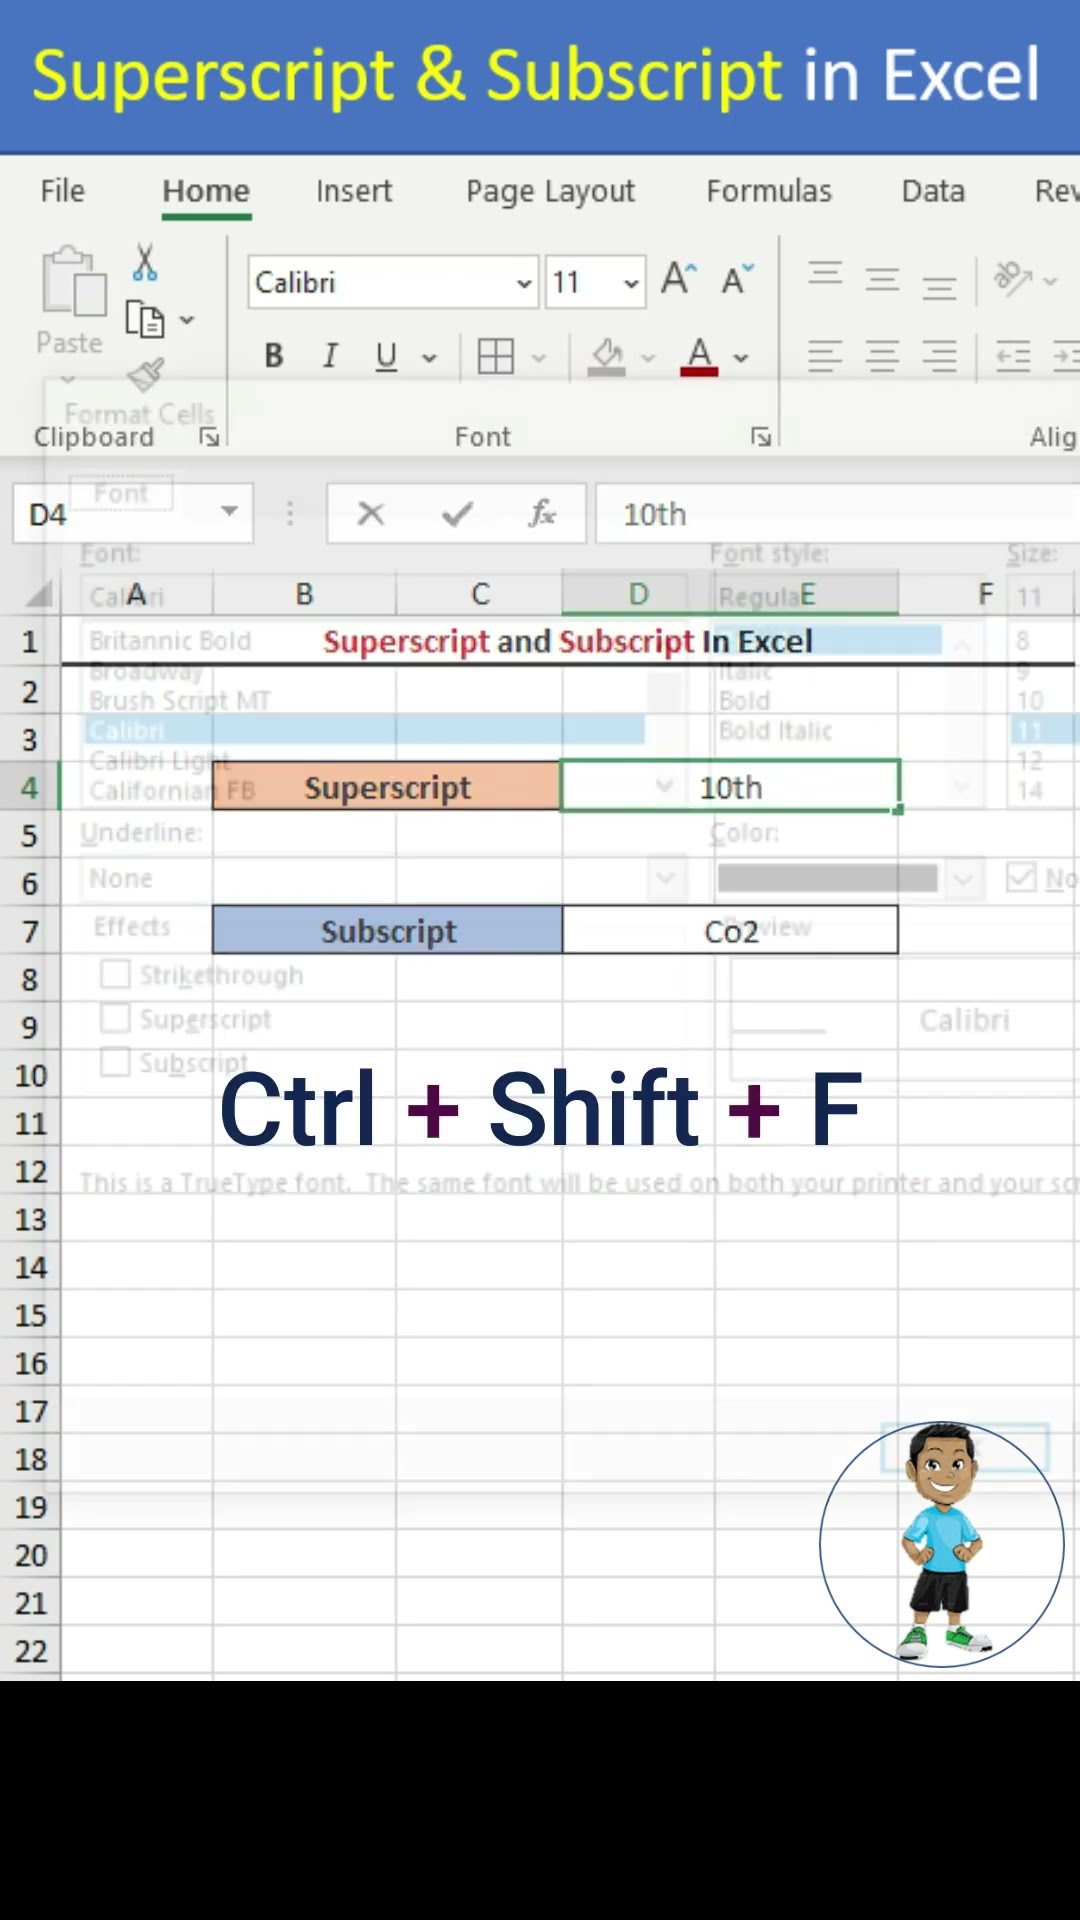 Superscript and subscript in Excel #excel #exceltips #exceltutorial #msexcel #microsoftexcel